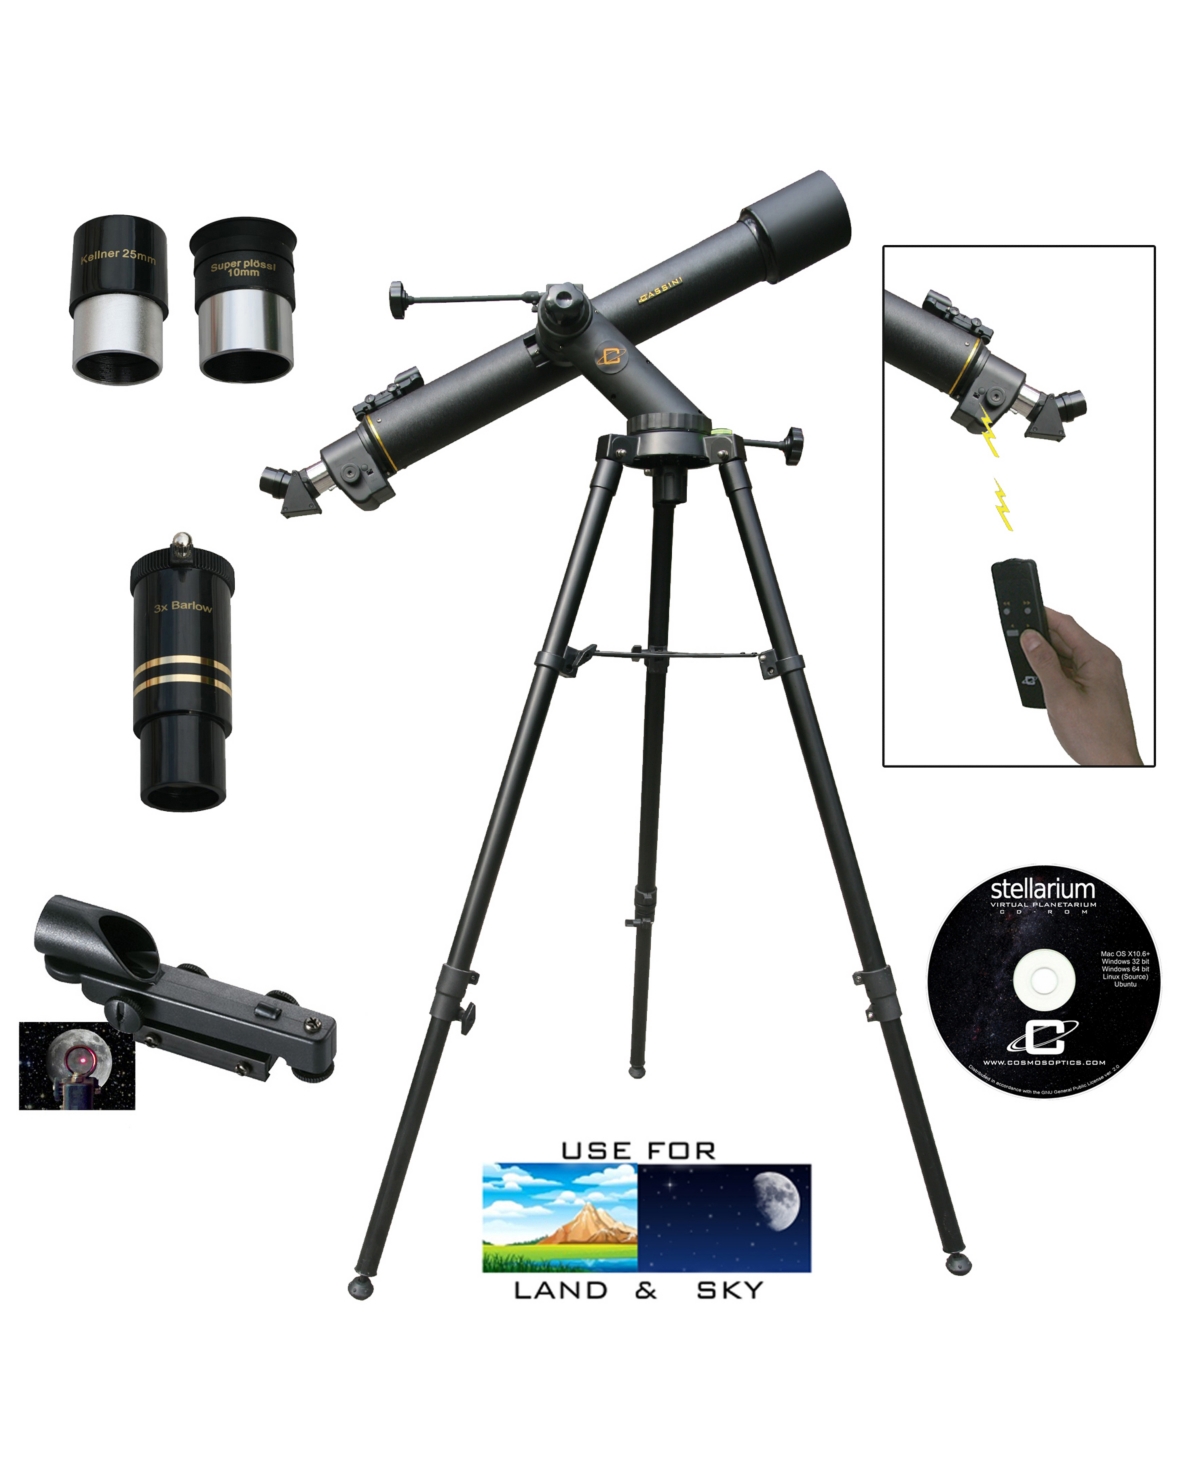 Cosmo Brands Cassini 800mm X 72mm Land, Sky Tracker Telescope With Electronic Focus Remote In Black